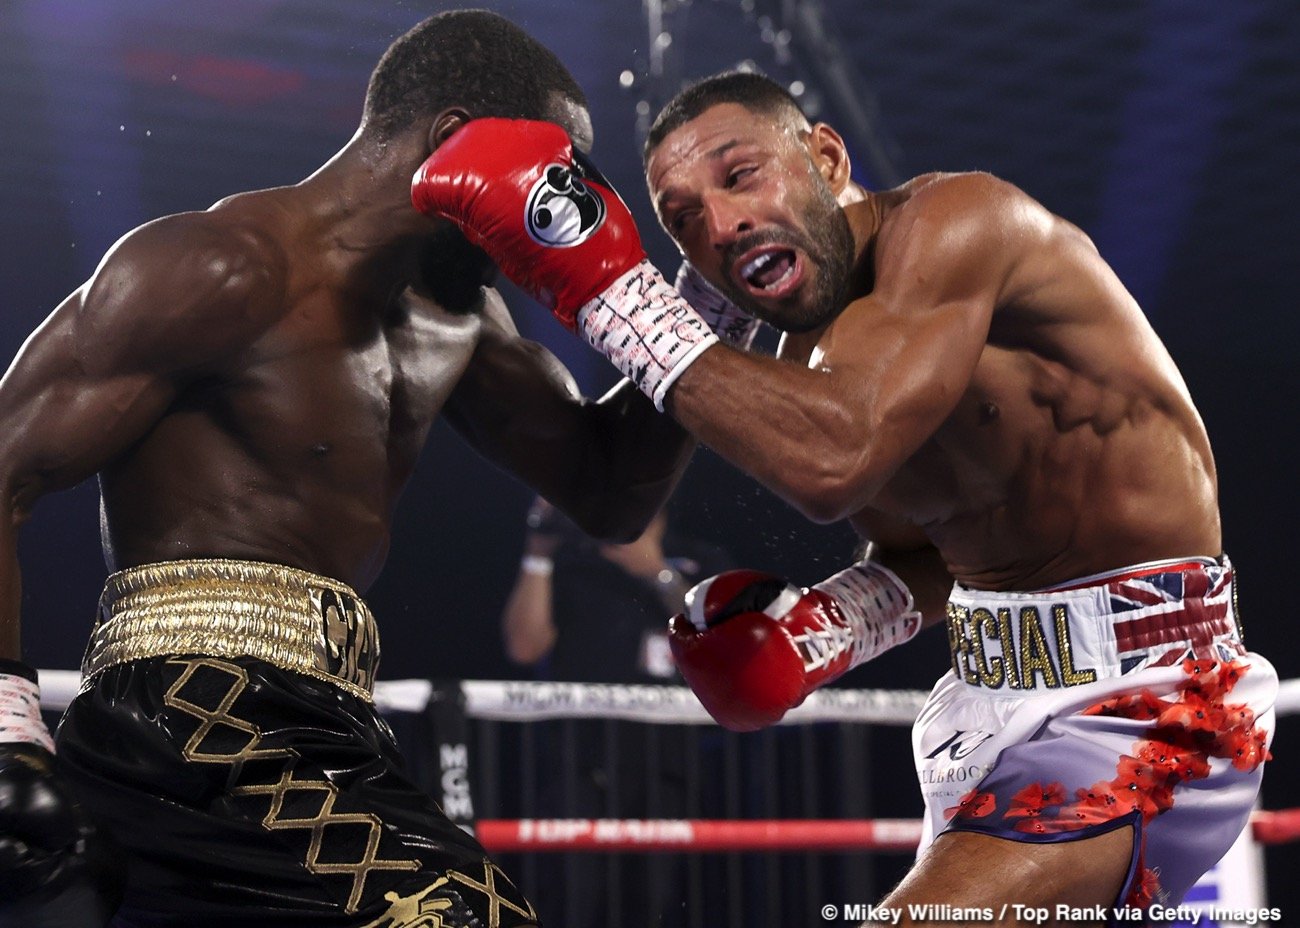 Errol Spence Jr., Kell Brook, Manny Pacquiao, Terence Crawford boxing image / photo